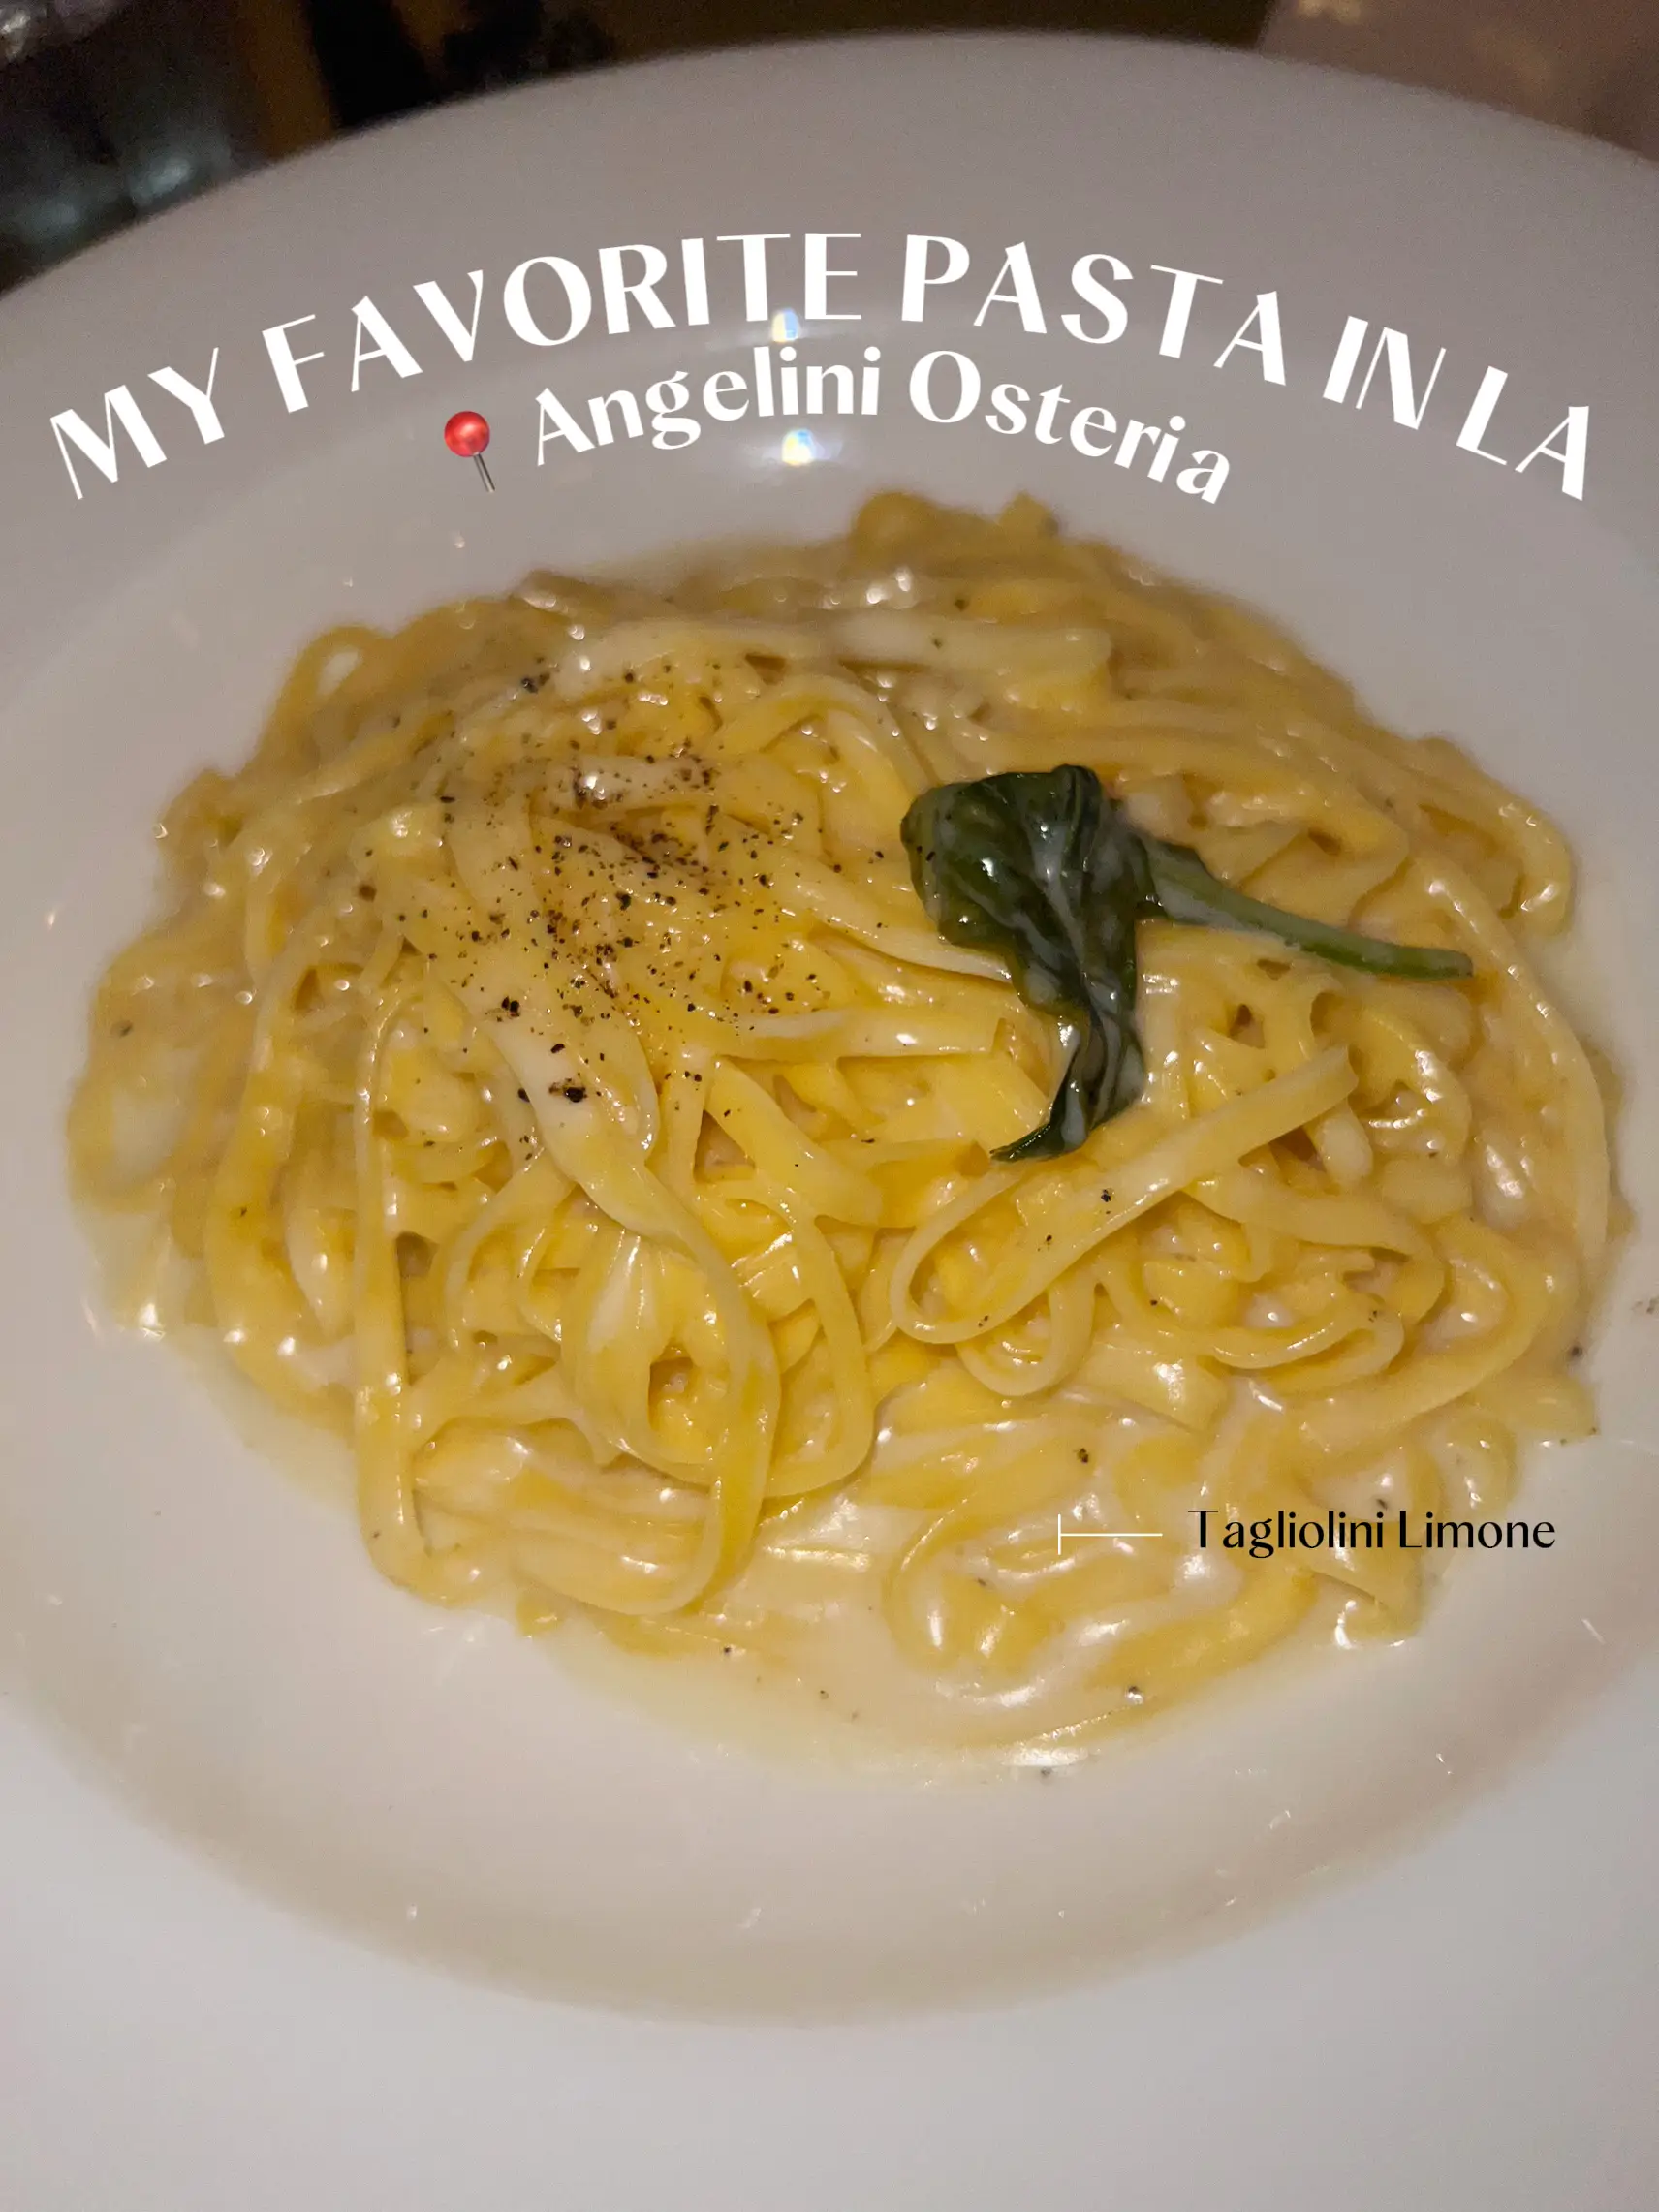 FAV PASTA IN LOS ANGELES - Angelini Osteria's images